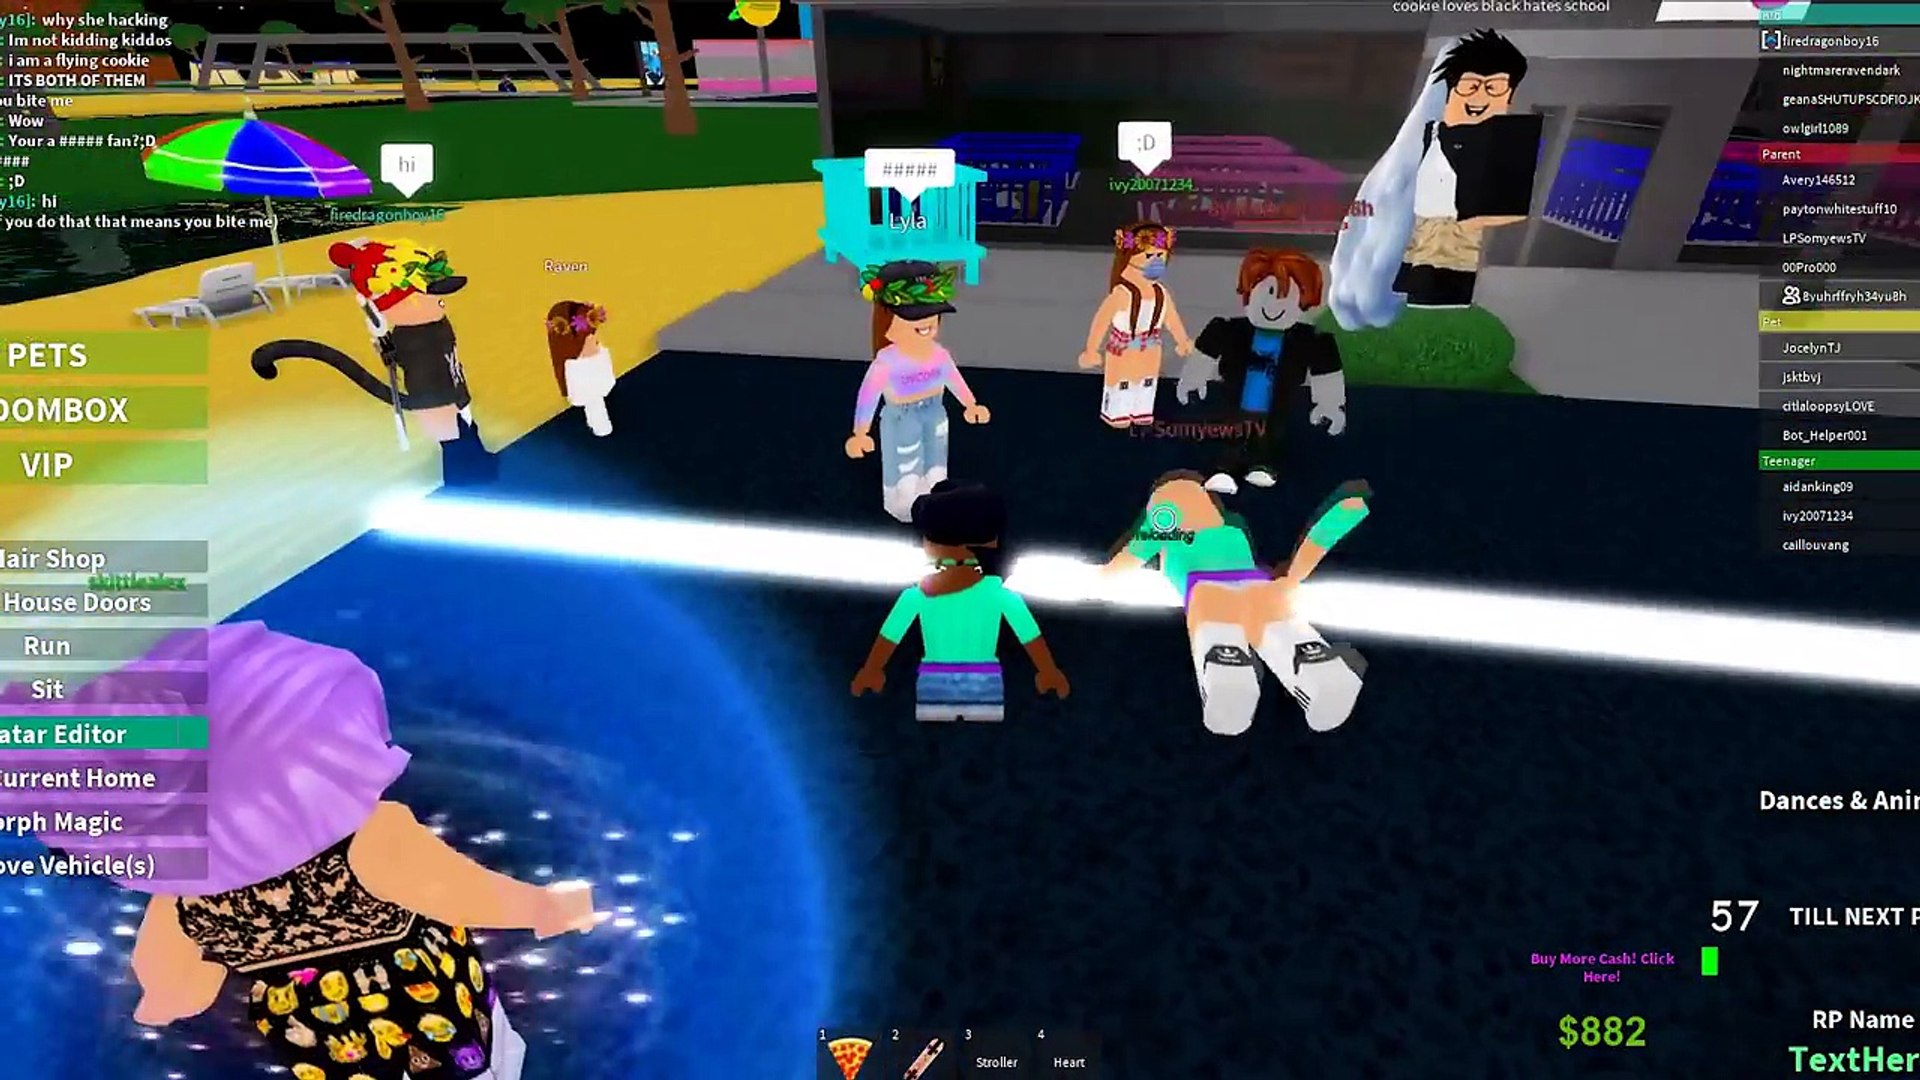 Roblox Admin Command Pranks Dailymotion Video - roblox admin commands adopt and raise a cute kid